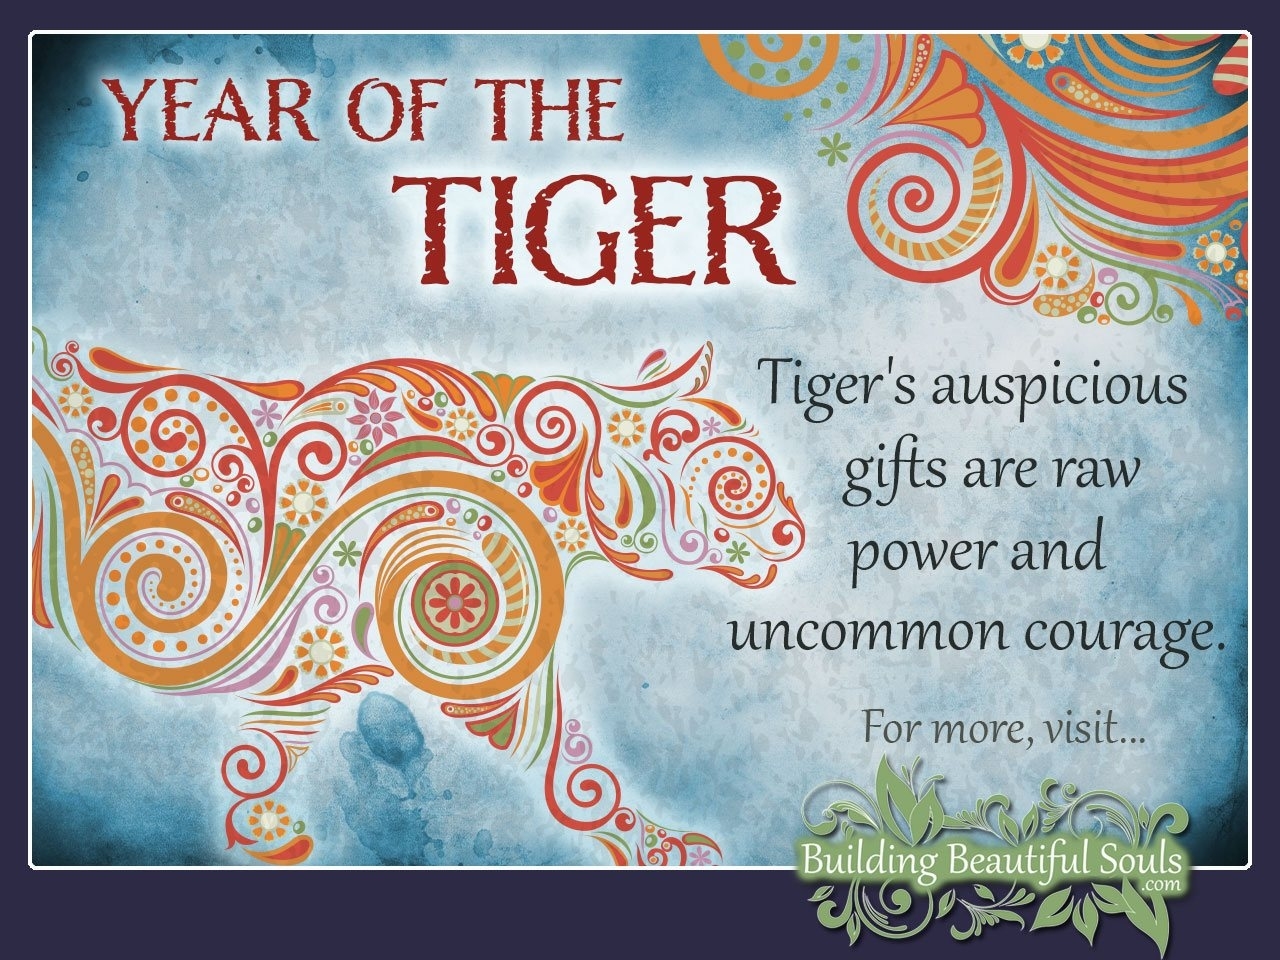 Year Of The Tiger | Chinese Zodiac Tiger | Chinese Zodiac Chinese Zodiac Calendar Tiger